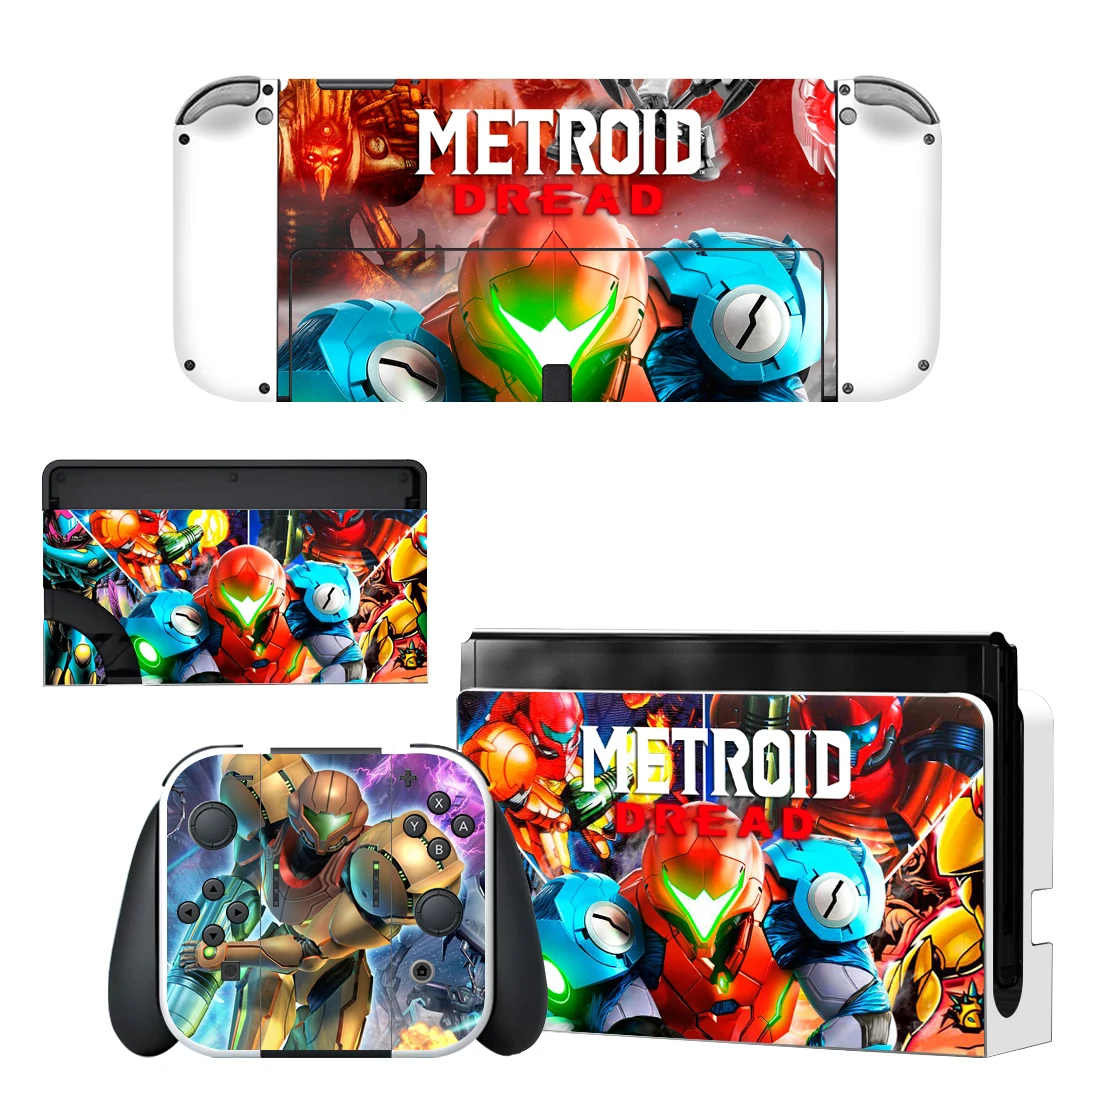 

Metroid Dread Nintendoswitch Skin Cover Sticker Decal for Nintendo Switch OLED Console Joy-con Controller Dock Skin Vinyl